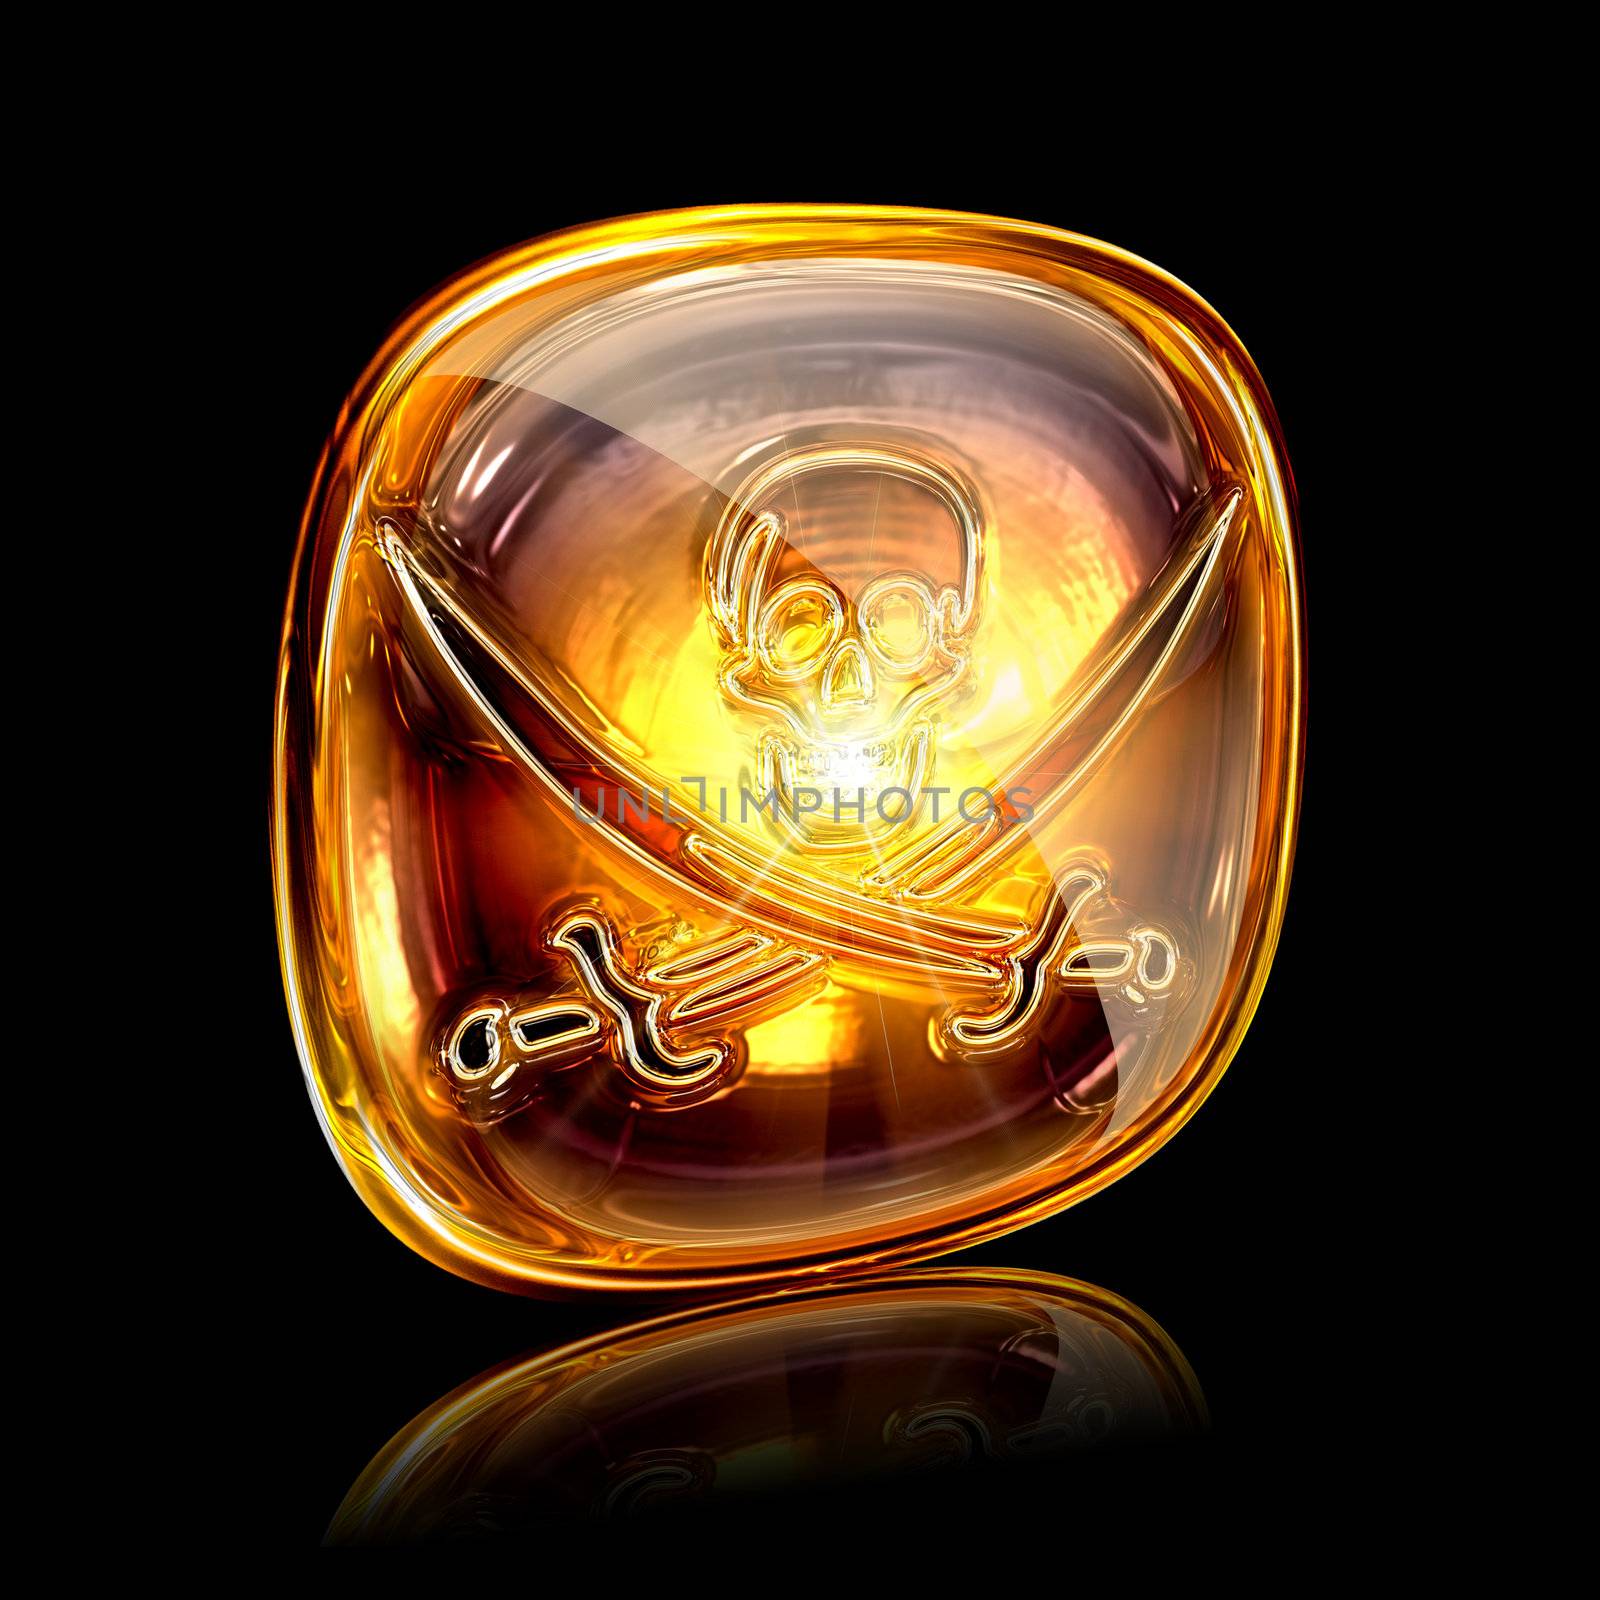 Pirate icon golden, isolated on black background by zeffss